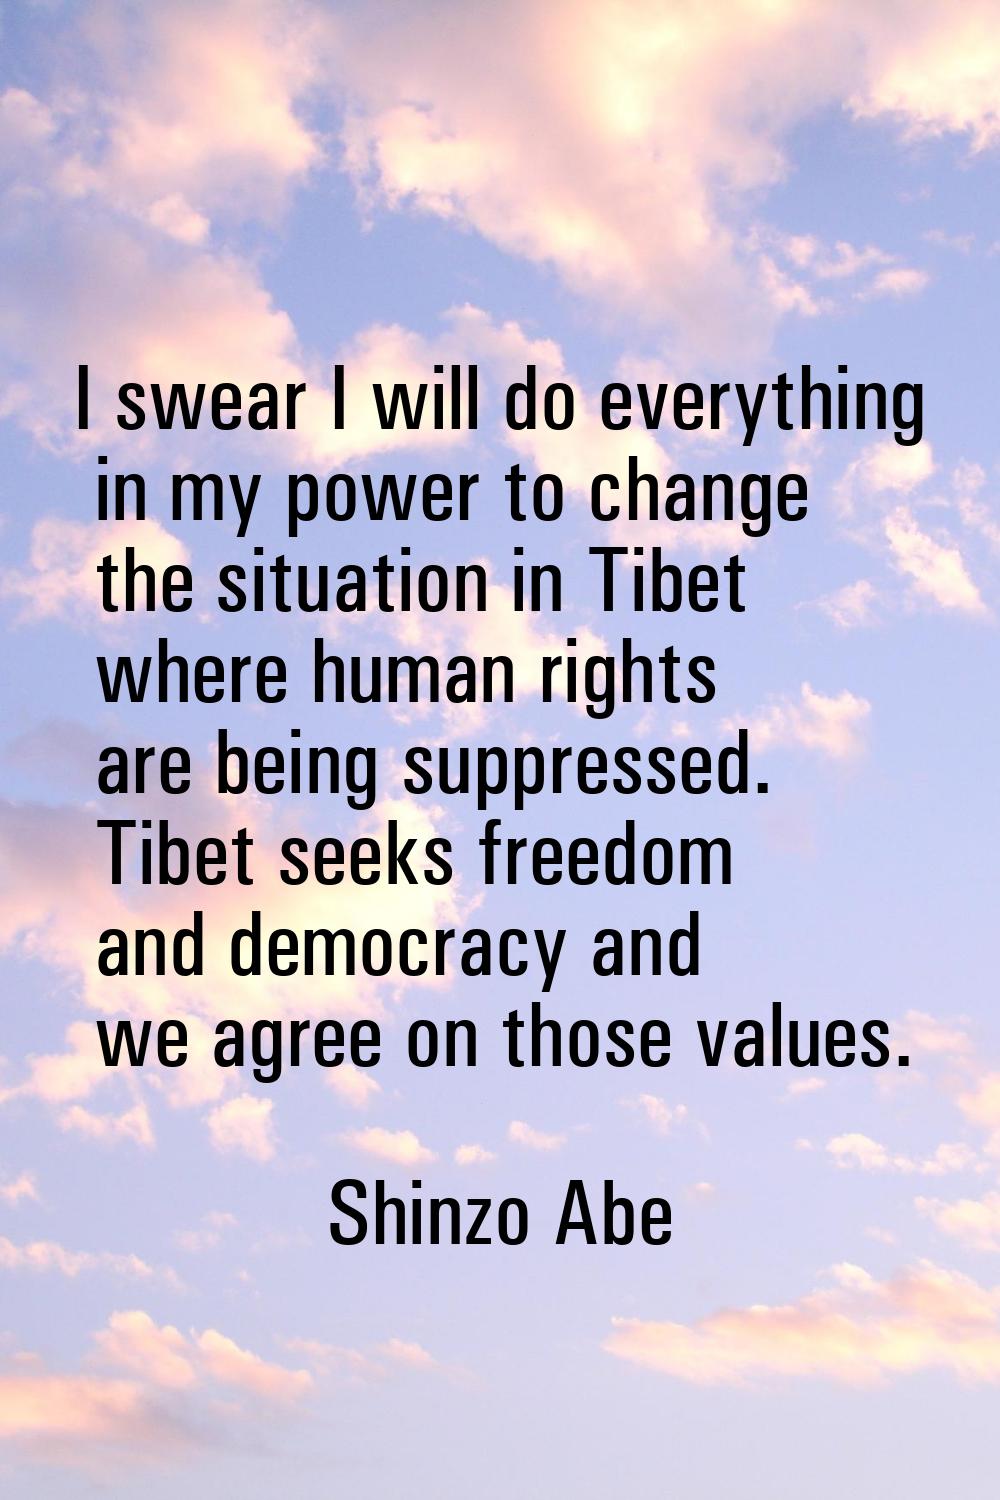 I swear I will do everything in my power to change the situation in Tibet where human rights are be